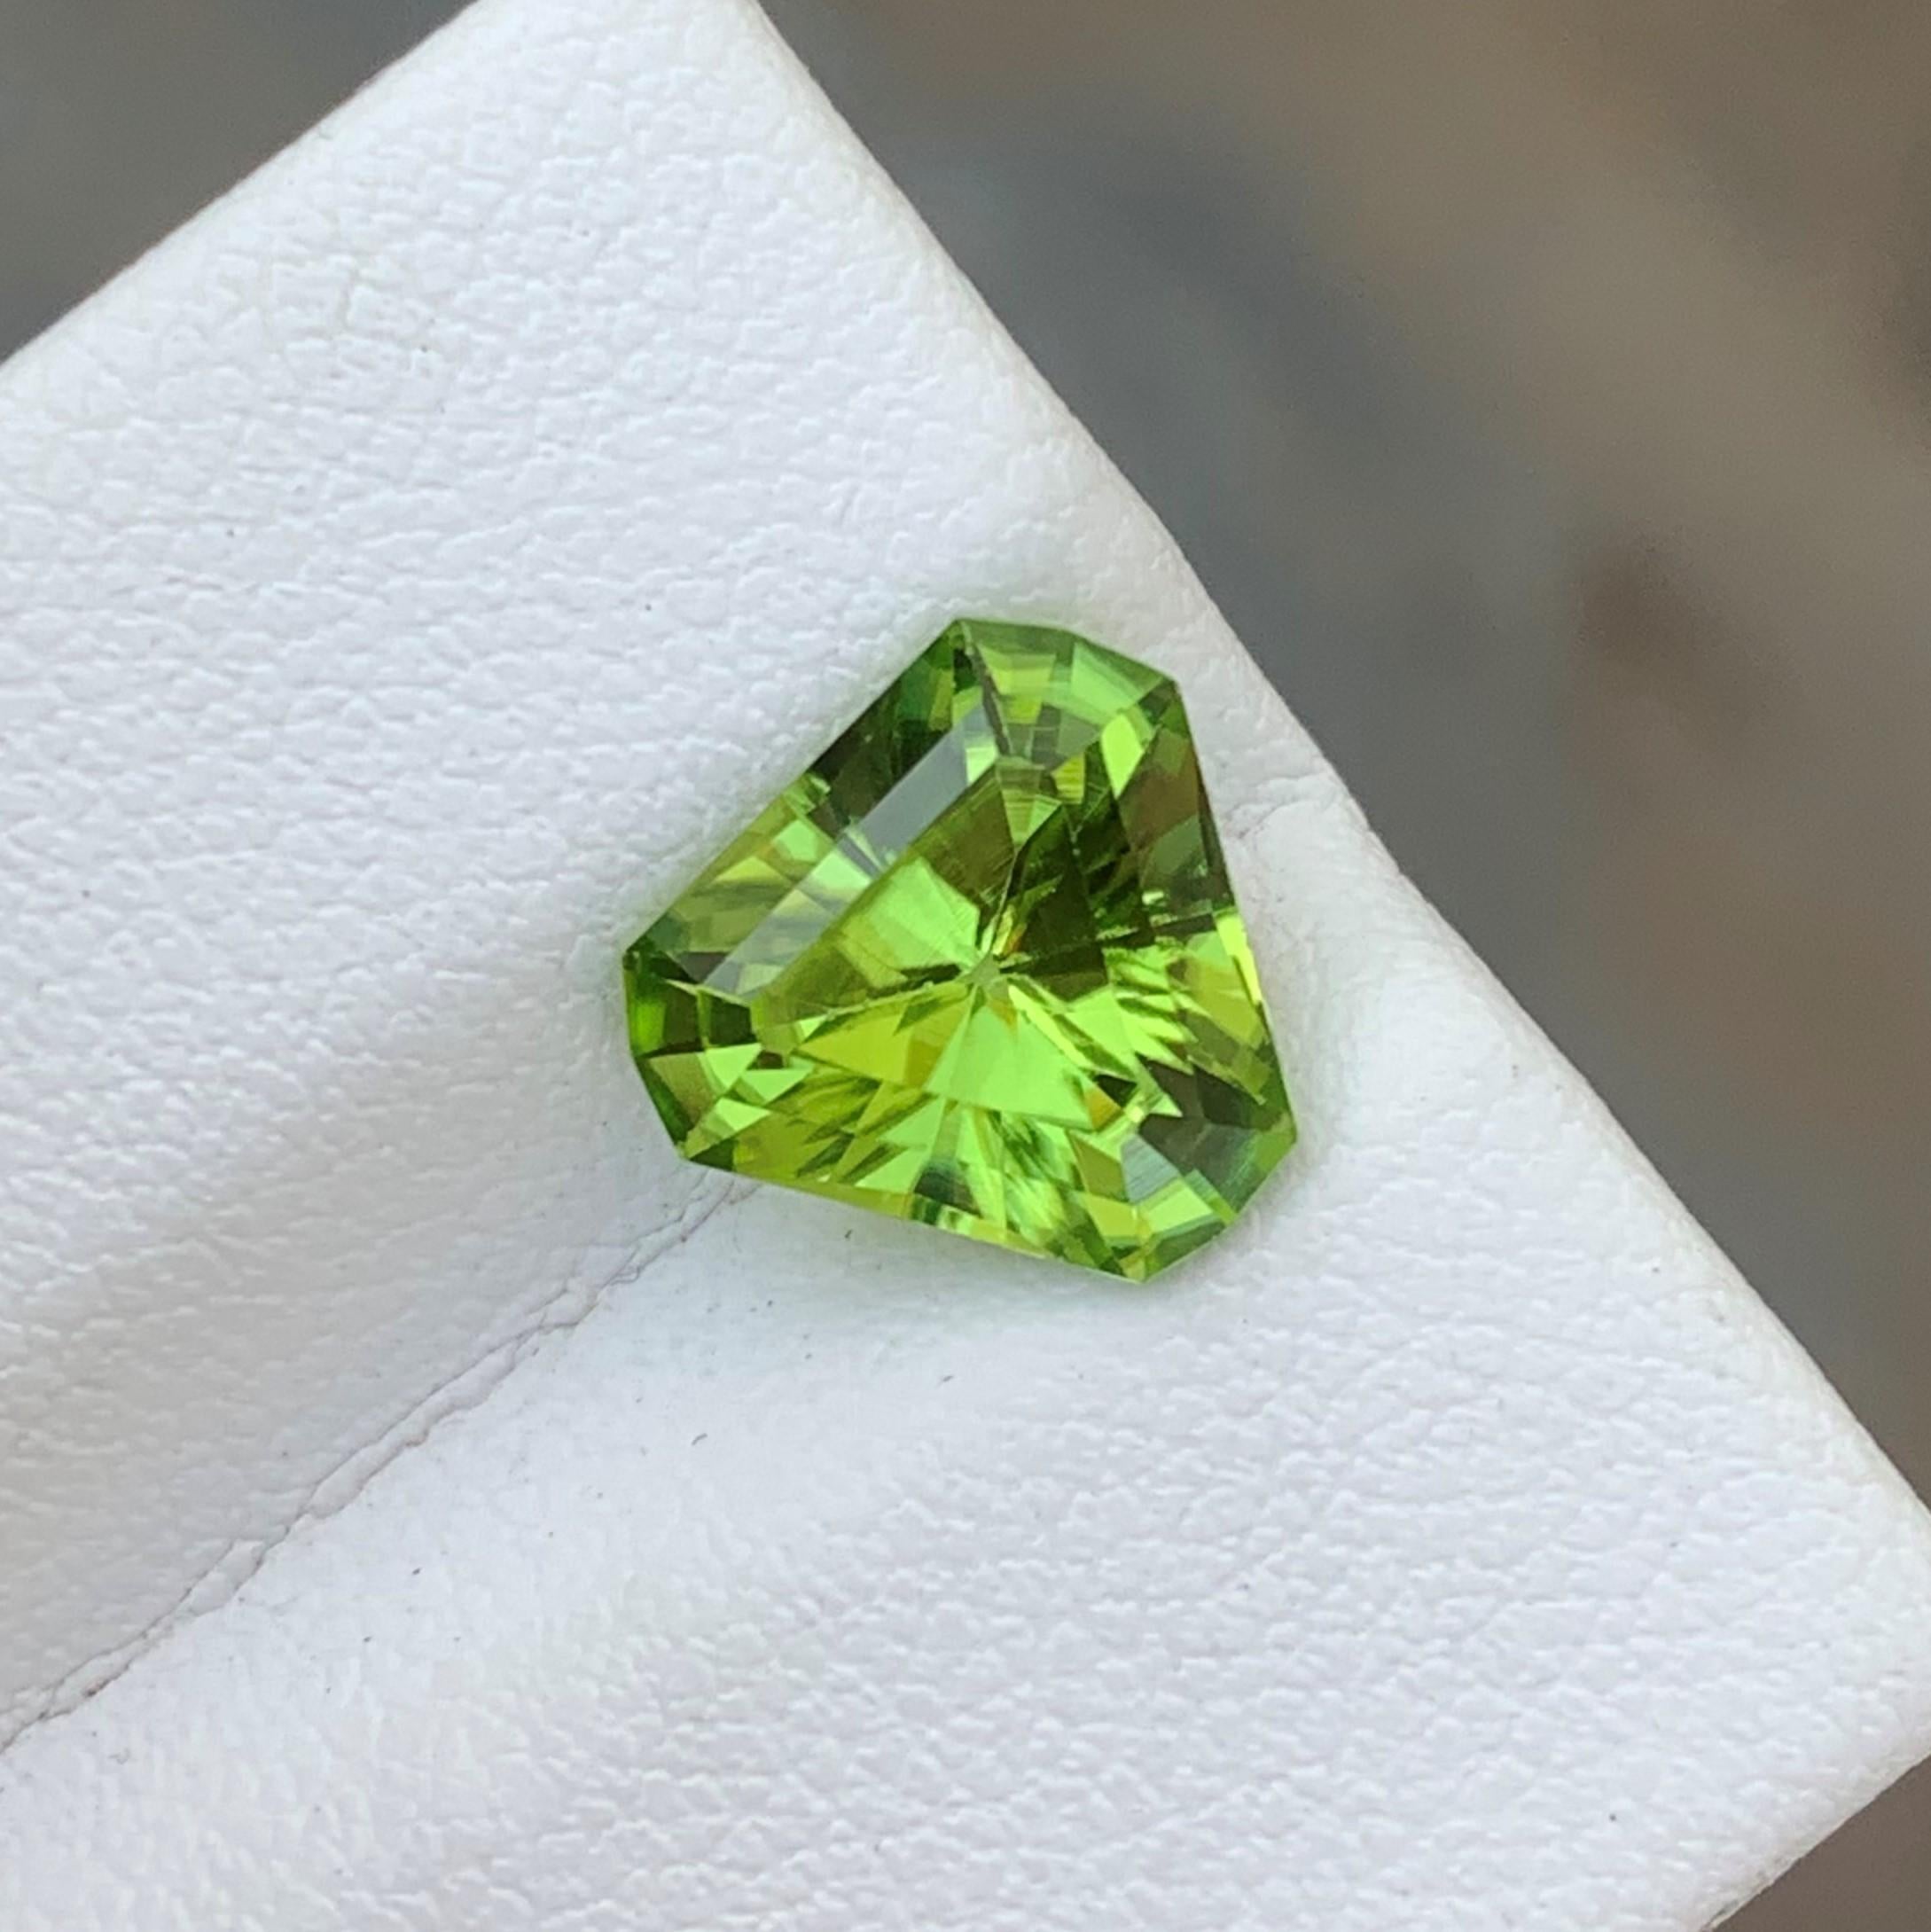 Gemstone Type : Peridot
Weight : 2.70 Carats
Dimension: 9x10x5.1 Mm 
Origin : Suppat Valley Pakistan
Clarity : Eye Clean
Certificate: On Demand
Color: Green
Treatment: Non
Shape: Trillion / Trilliant
It helps cure diseases related to lungs, breasts,